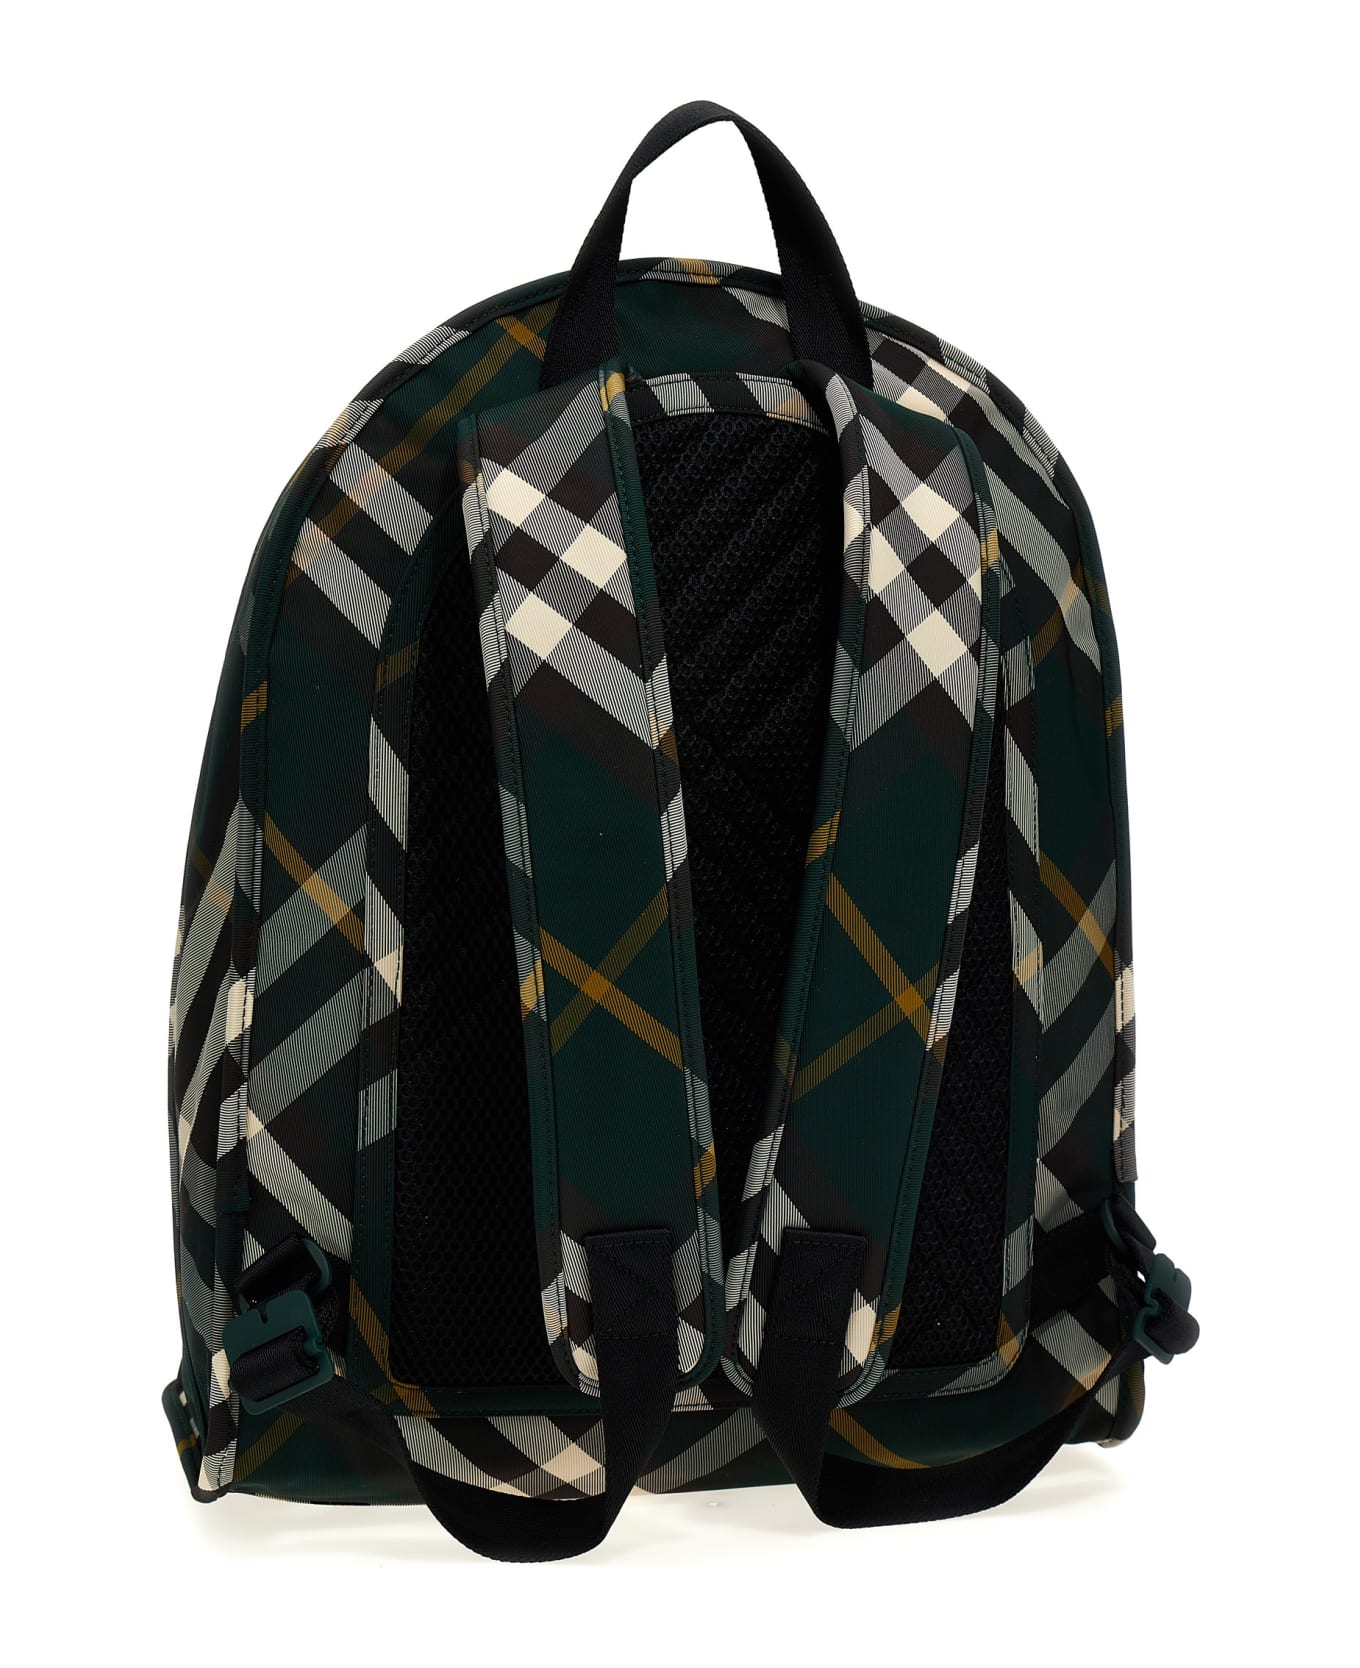 Burberry 'shield' Backpack - Green バックパック